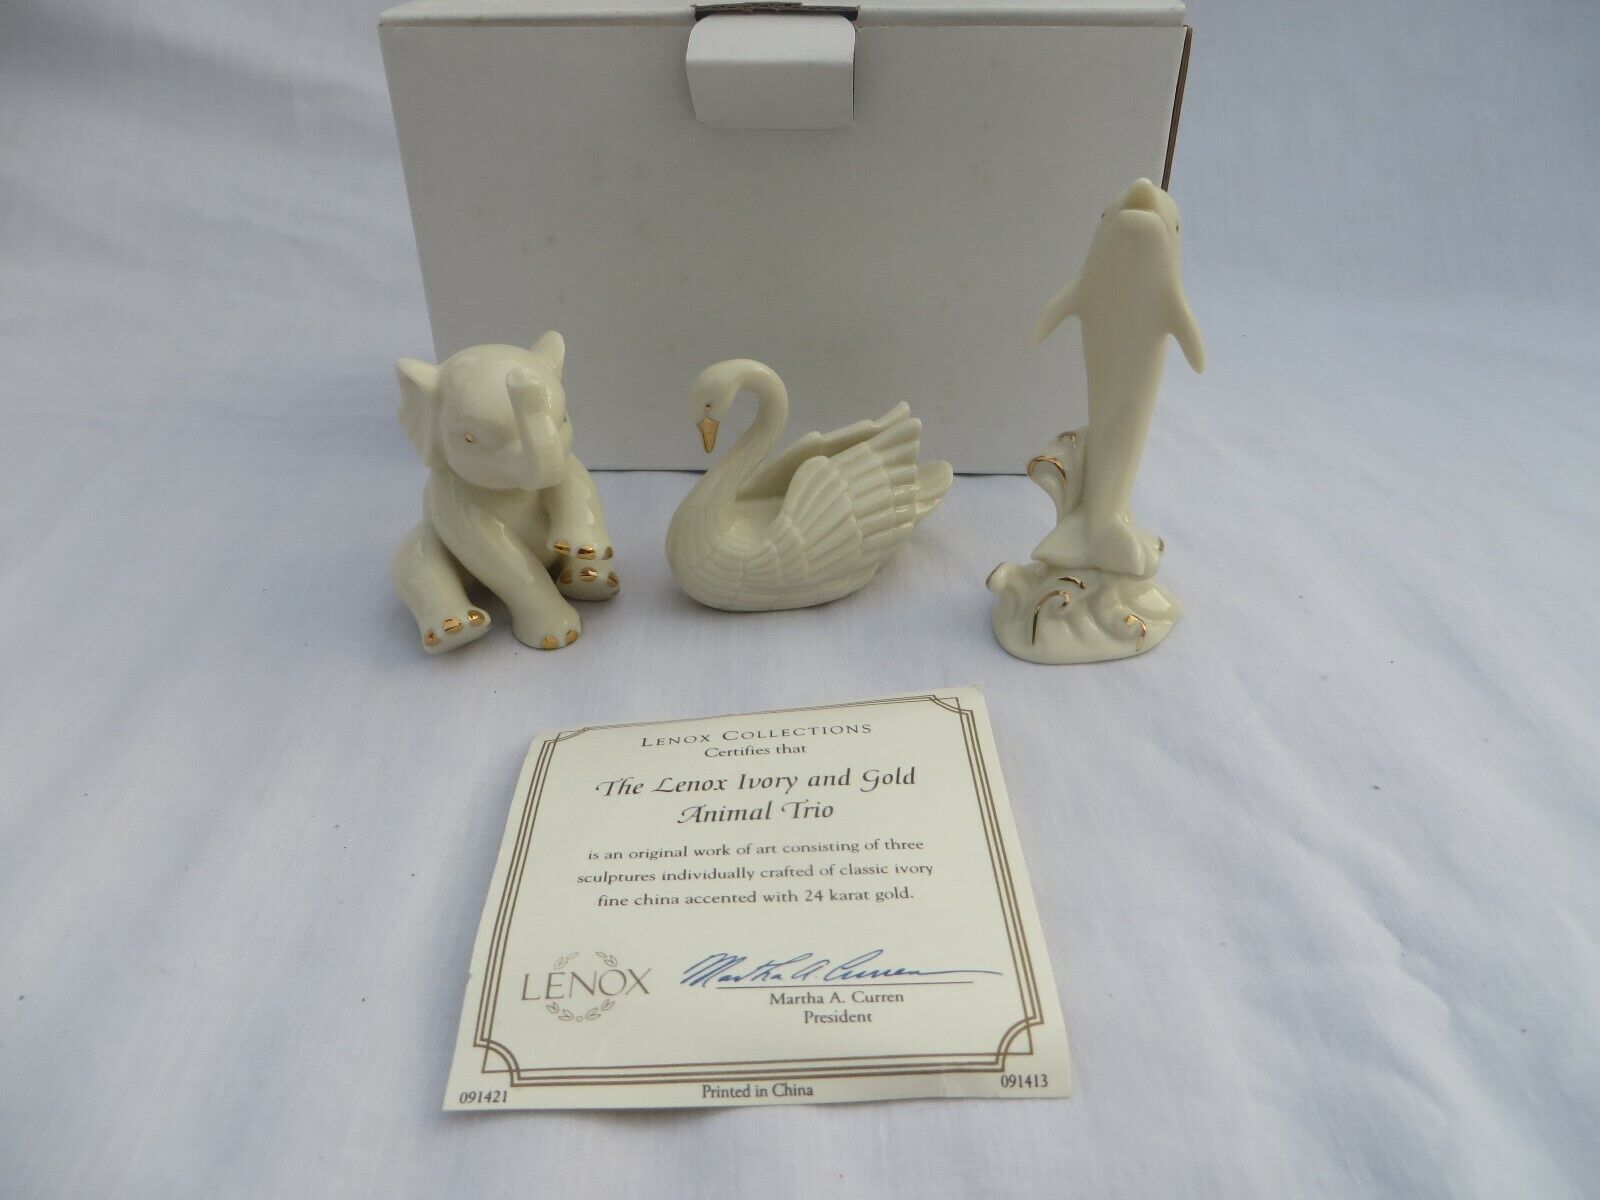 Lenox Collections Ivory Color 24k Gold Animal Trio original box & Certificate